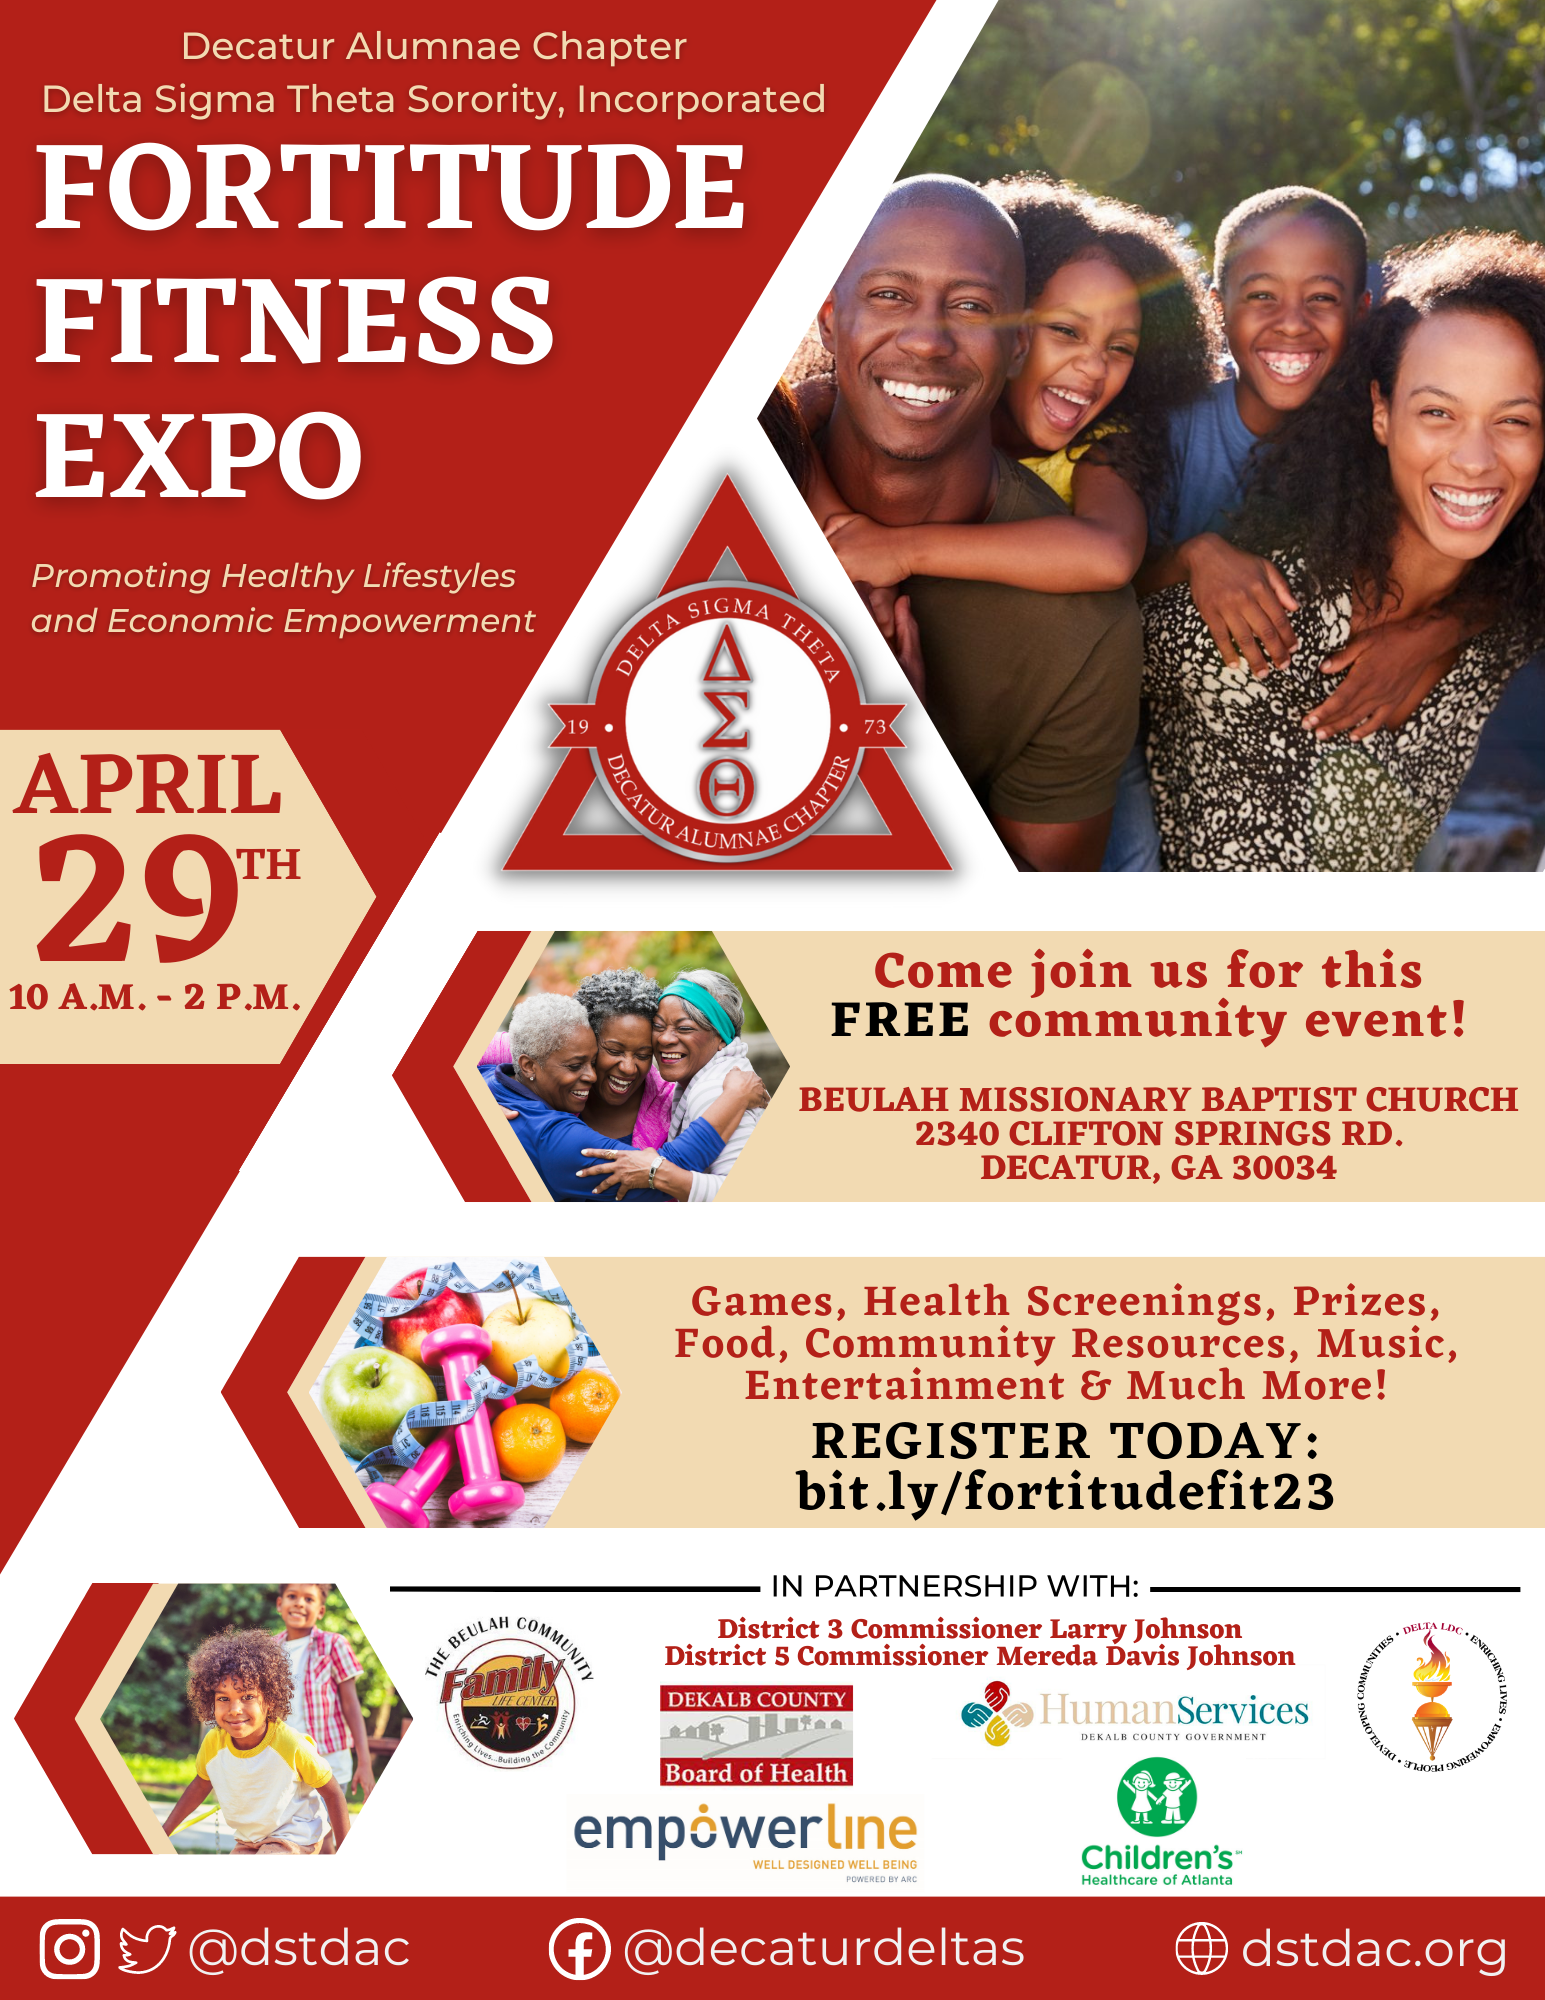 Fortitude Fitness Expo – Decatur Alumnae Chapter of Delta Sigma Theta